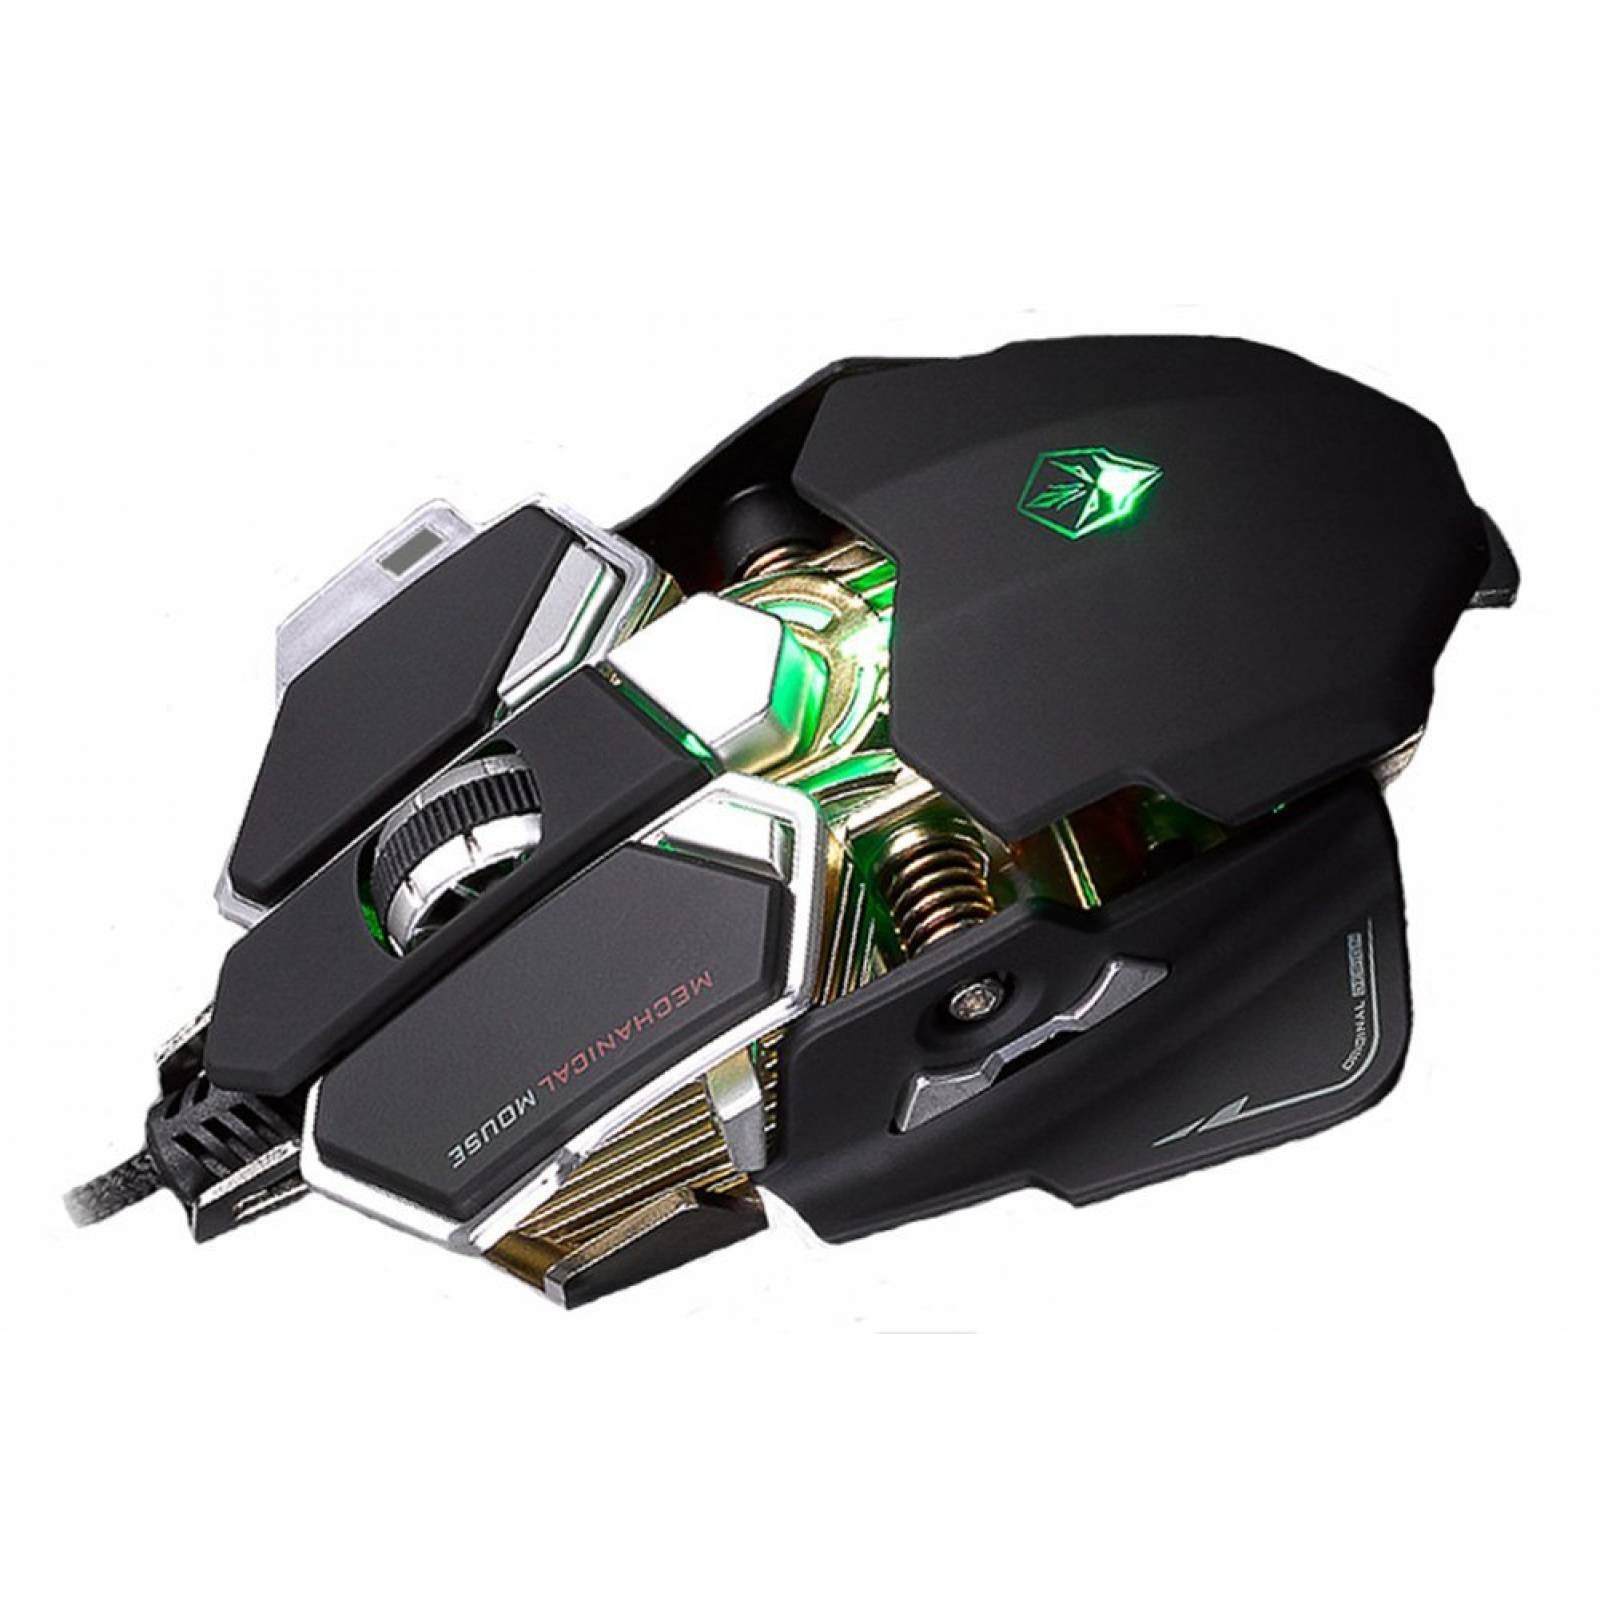 SUMLINK 4000 DPI cable profesional USB Gaming Mouse p -Negro